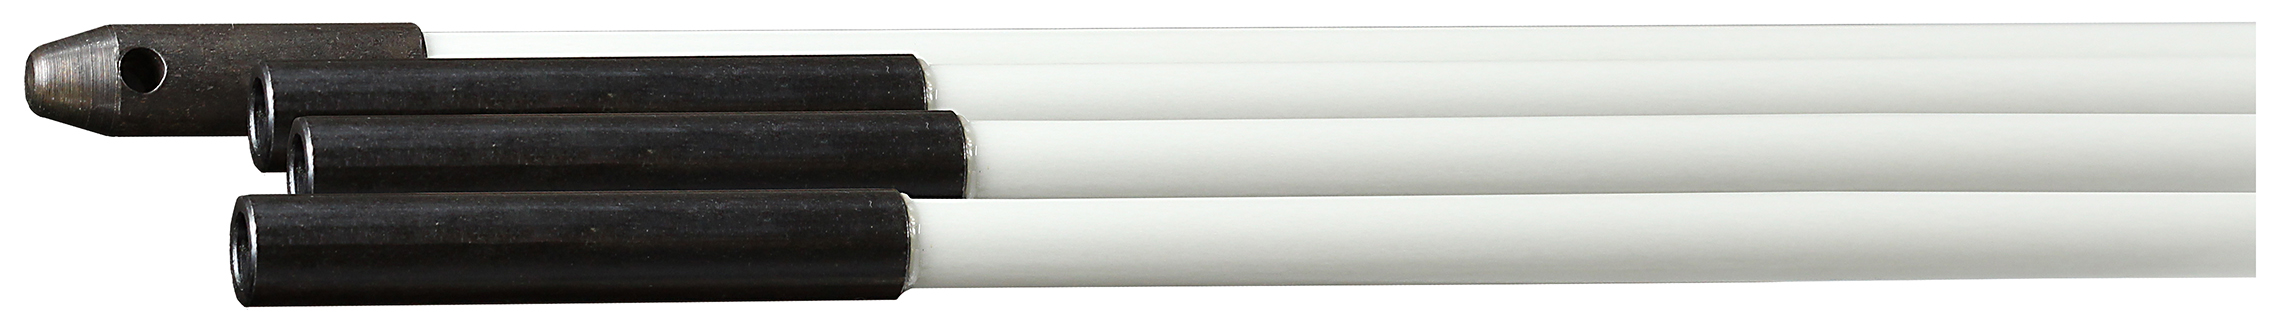 Quick Stick Rod, Pulling Eye and Hook mounting, High Strength Low Weight construction, Fiberglass material, 1/4 in. diameter, 12 ft. length, Four White